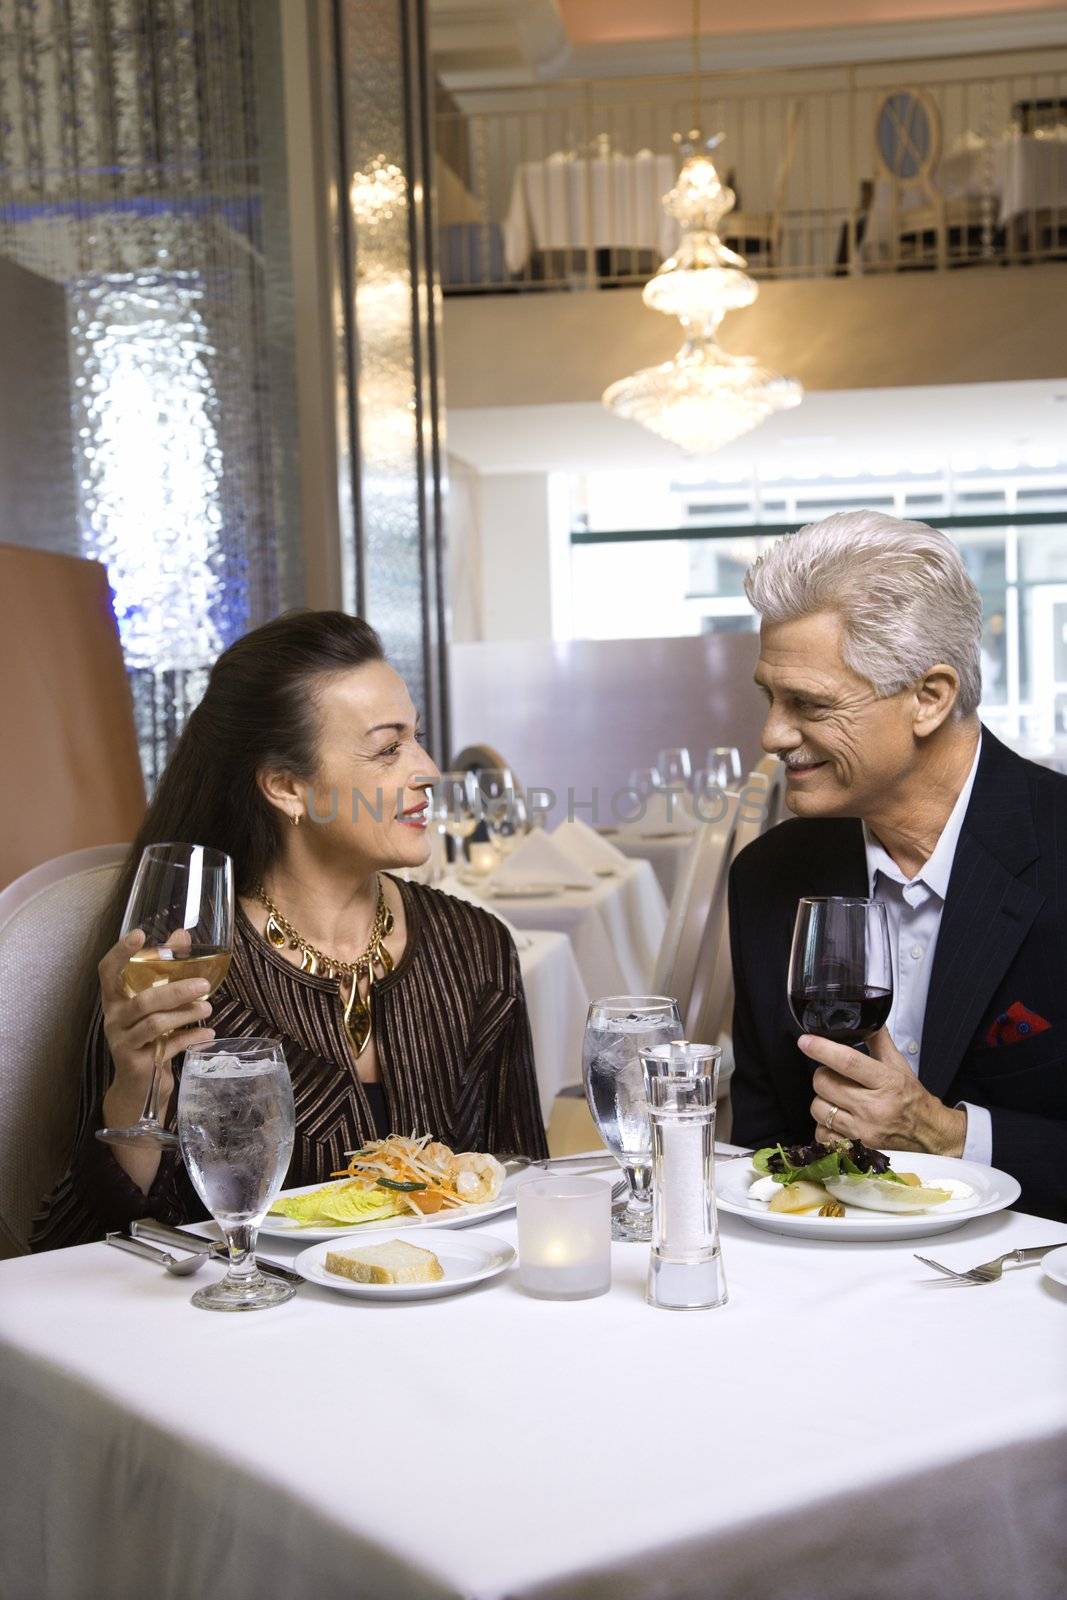 Caucasian mature adult male and prime adult female sitting at restaurant table.